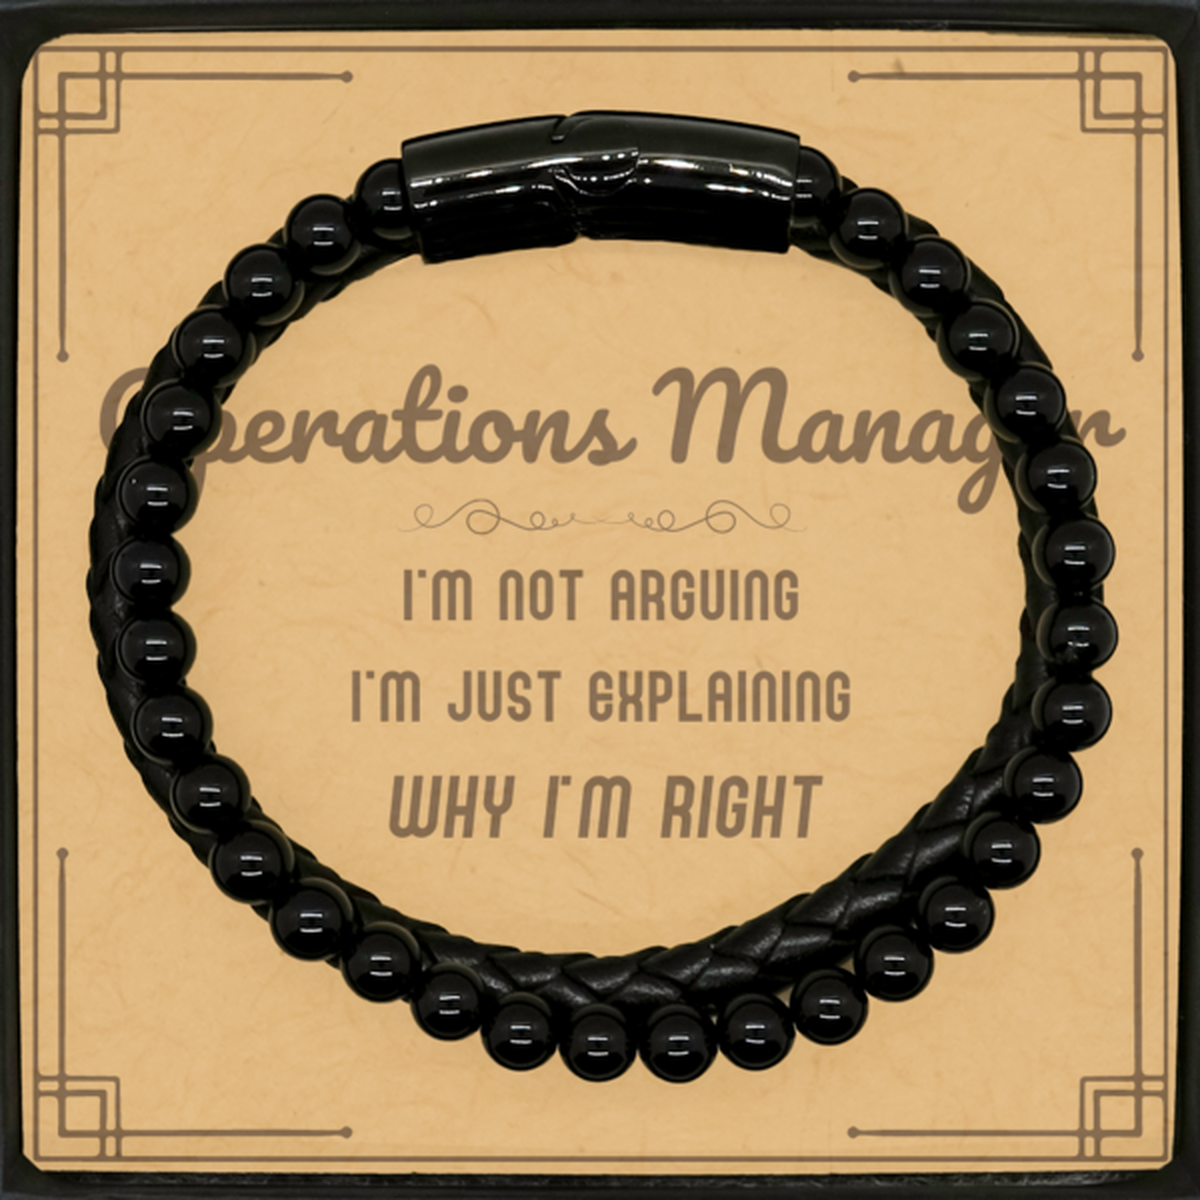 Operations Manager I'm not Arguing. I'm Just Explaining Why I'm RIGHT Stone Leather Bracelets, Funny Saying Quote Operations Manager Gifts For Operations Manager Message Card Graduation Birthday Christmas Gifts for Men Women Coworker